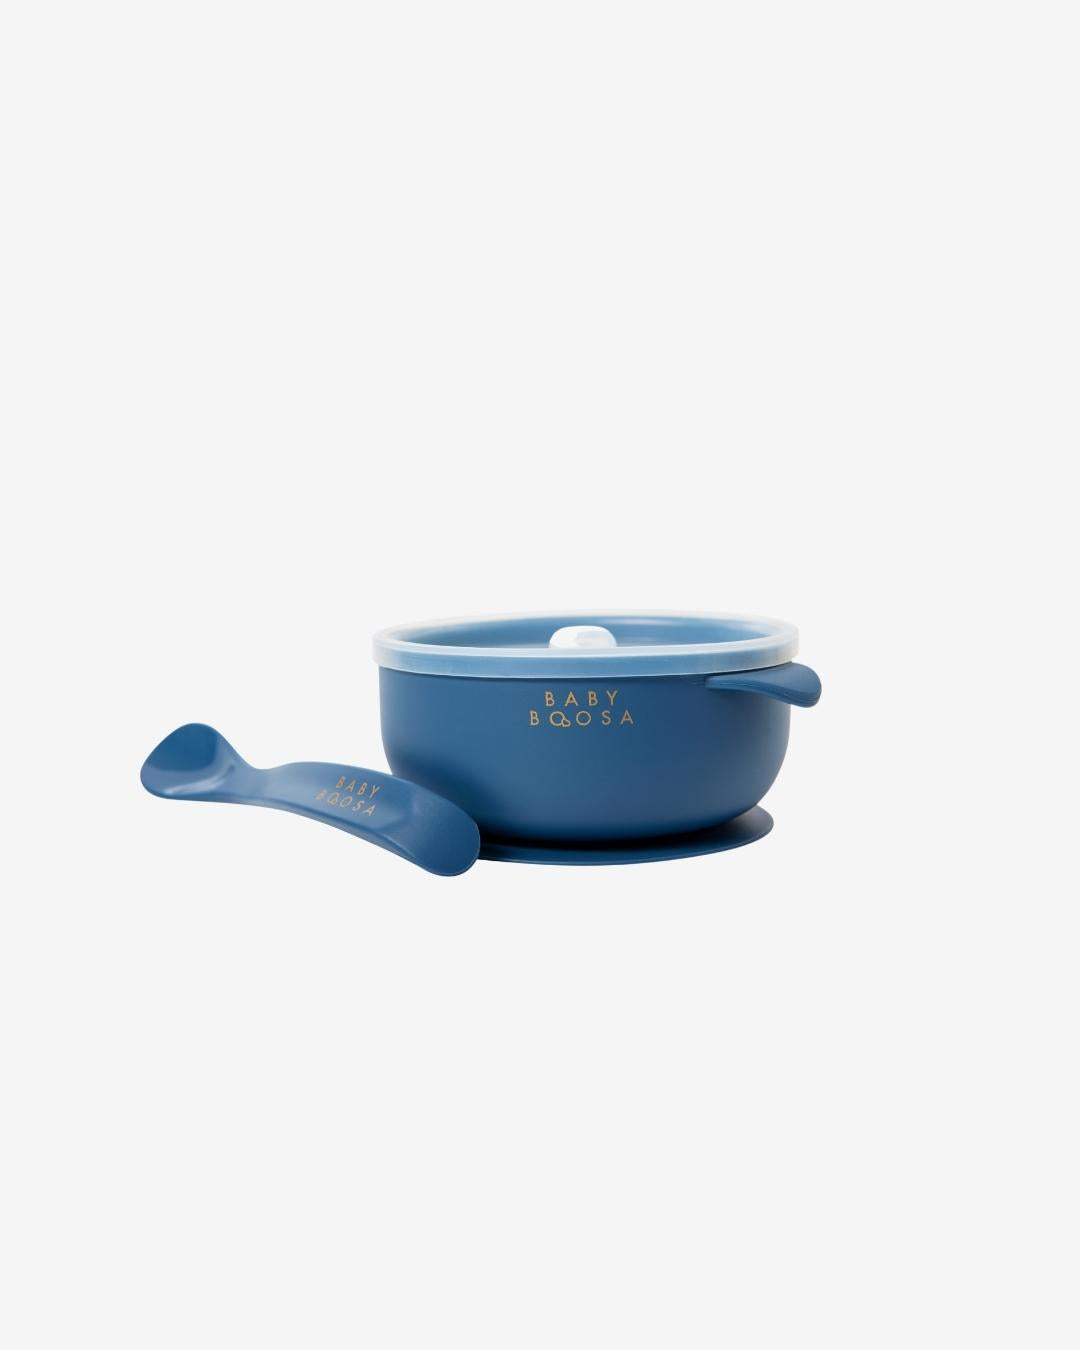 Bowl + Lid + Spoon Set | Grippy Suction | No-Spill | Easy Clean | Teething Soft Spoon (Riviera Blue)